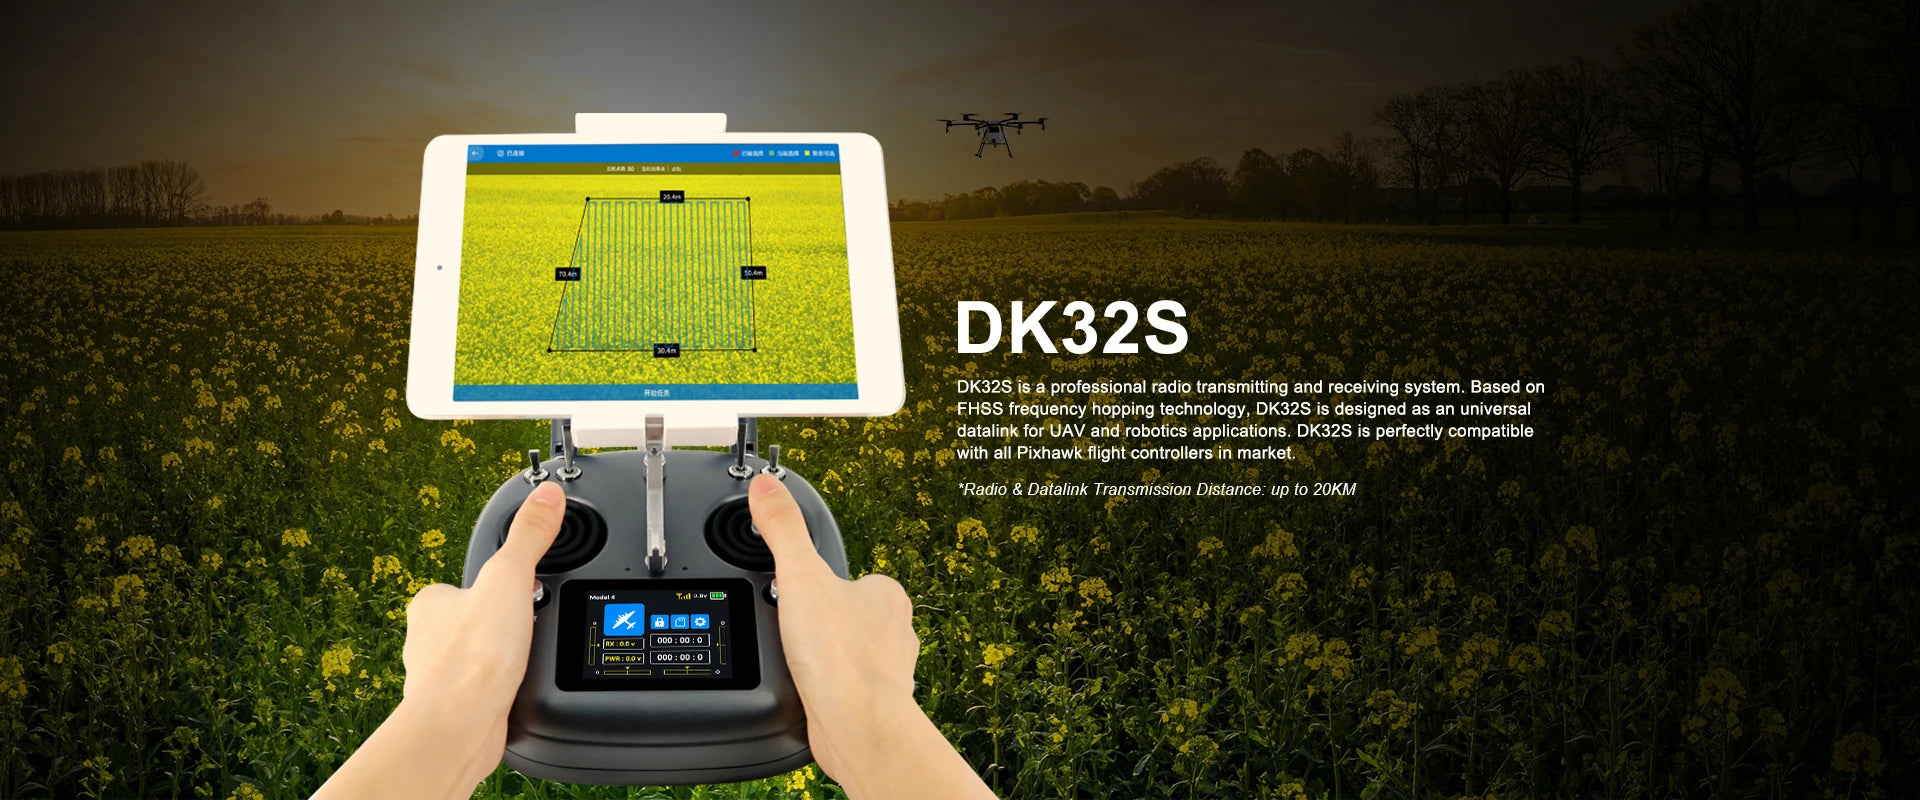 DK32S is a professional radio transmitting and receiving system . based on